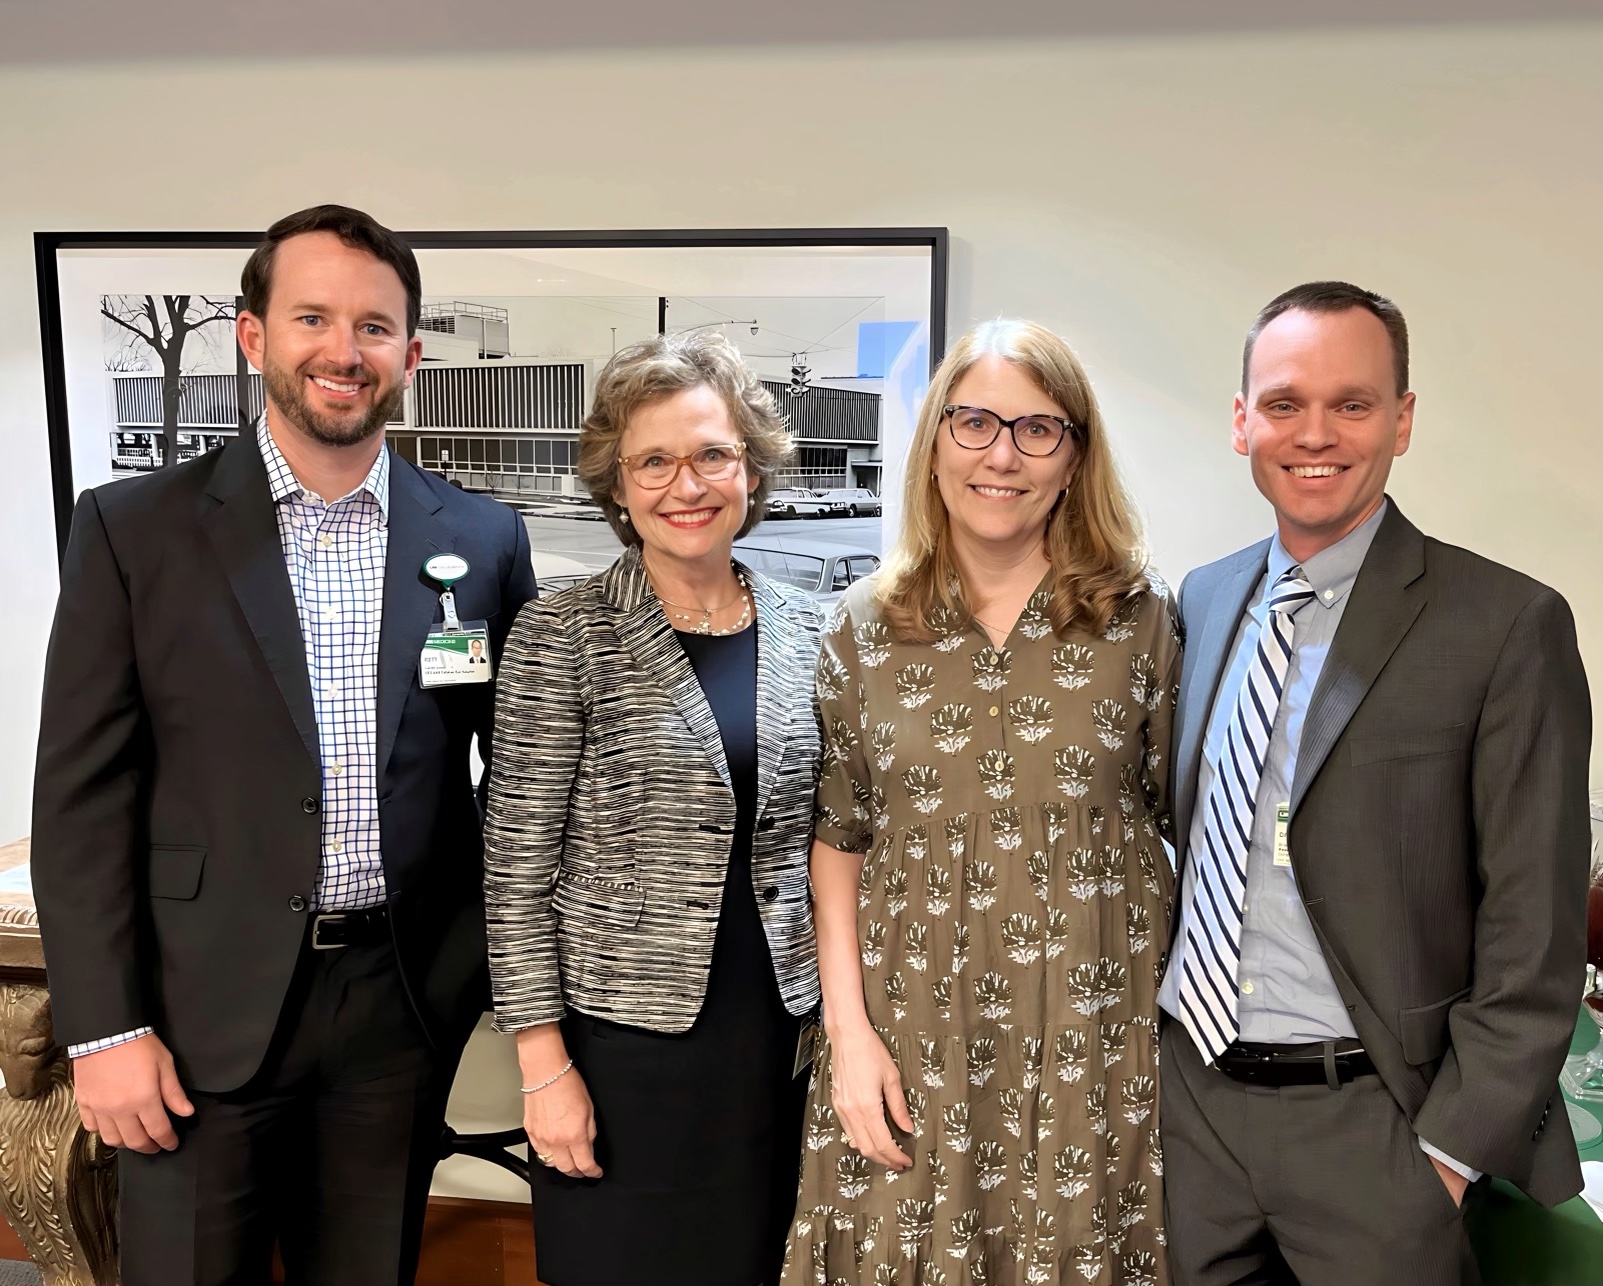 Left to Right: Rett Grover, CEO, UAB Callahan Eye; Barbara Evers, Executive Director, EyeSight Foundation; Dawn DeCarlo, O.D., Ph.D., MS, MSPH; Brian Samuels, Chair, UAB Department of Ophthalmology and Visual Sciences